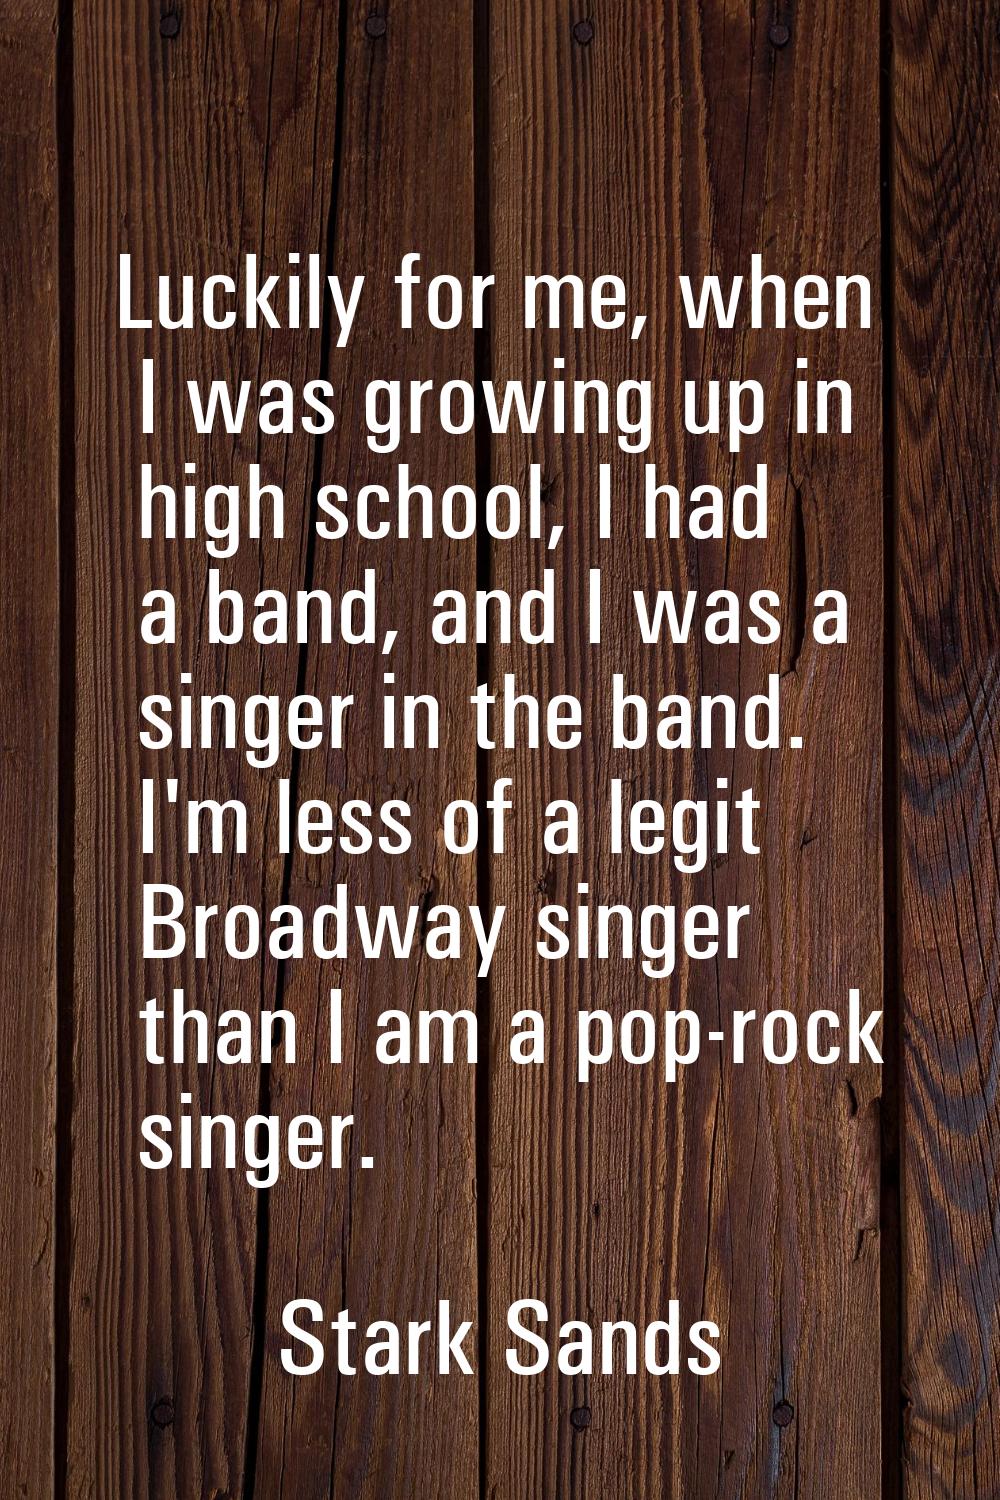 Luckily for me, when I was growing up in high school, I had a band, and I was a singer in the band.